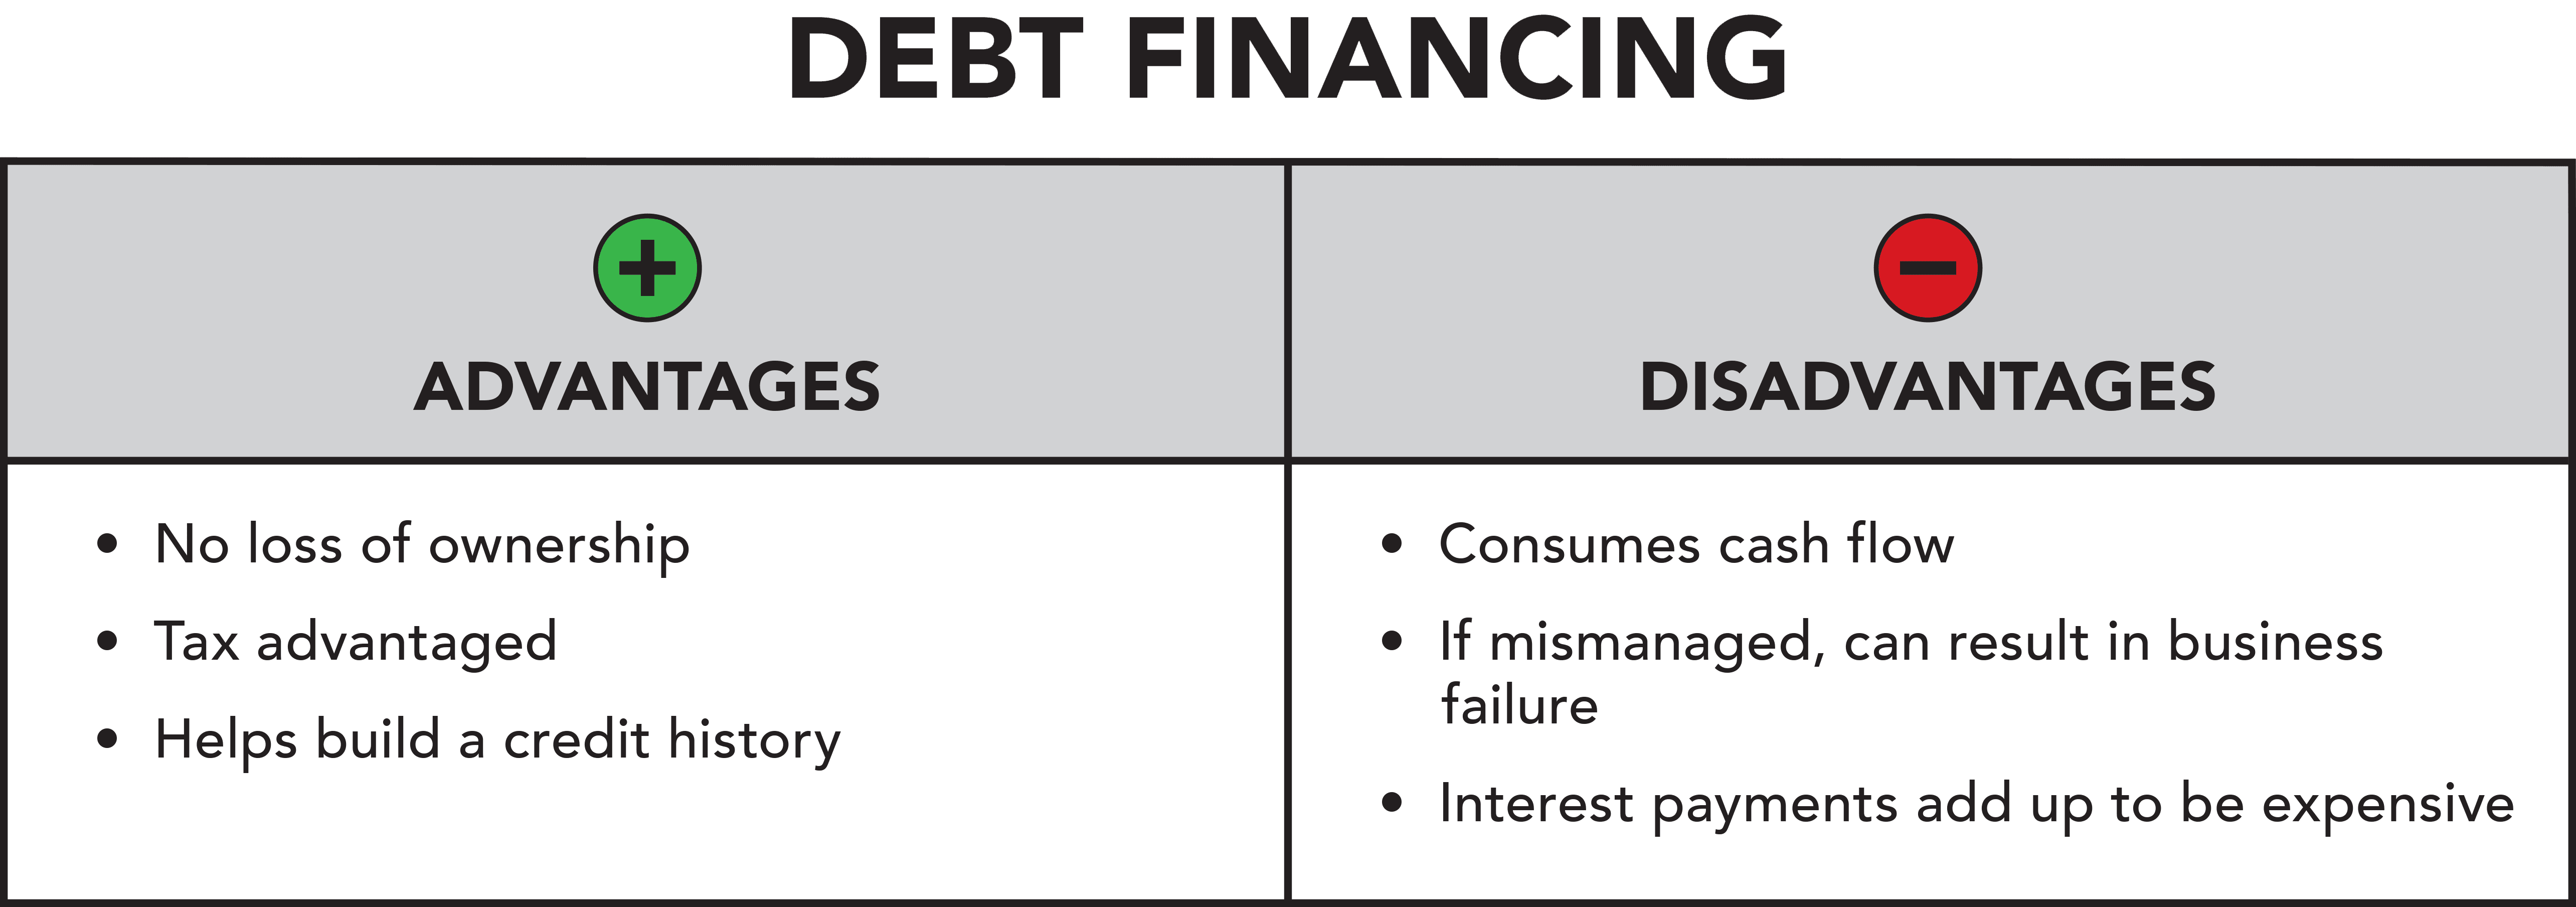 Debt financing should be considered carefully based on the situation your business is in.